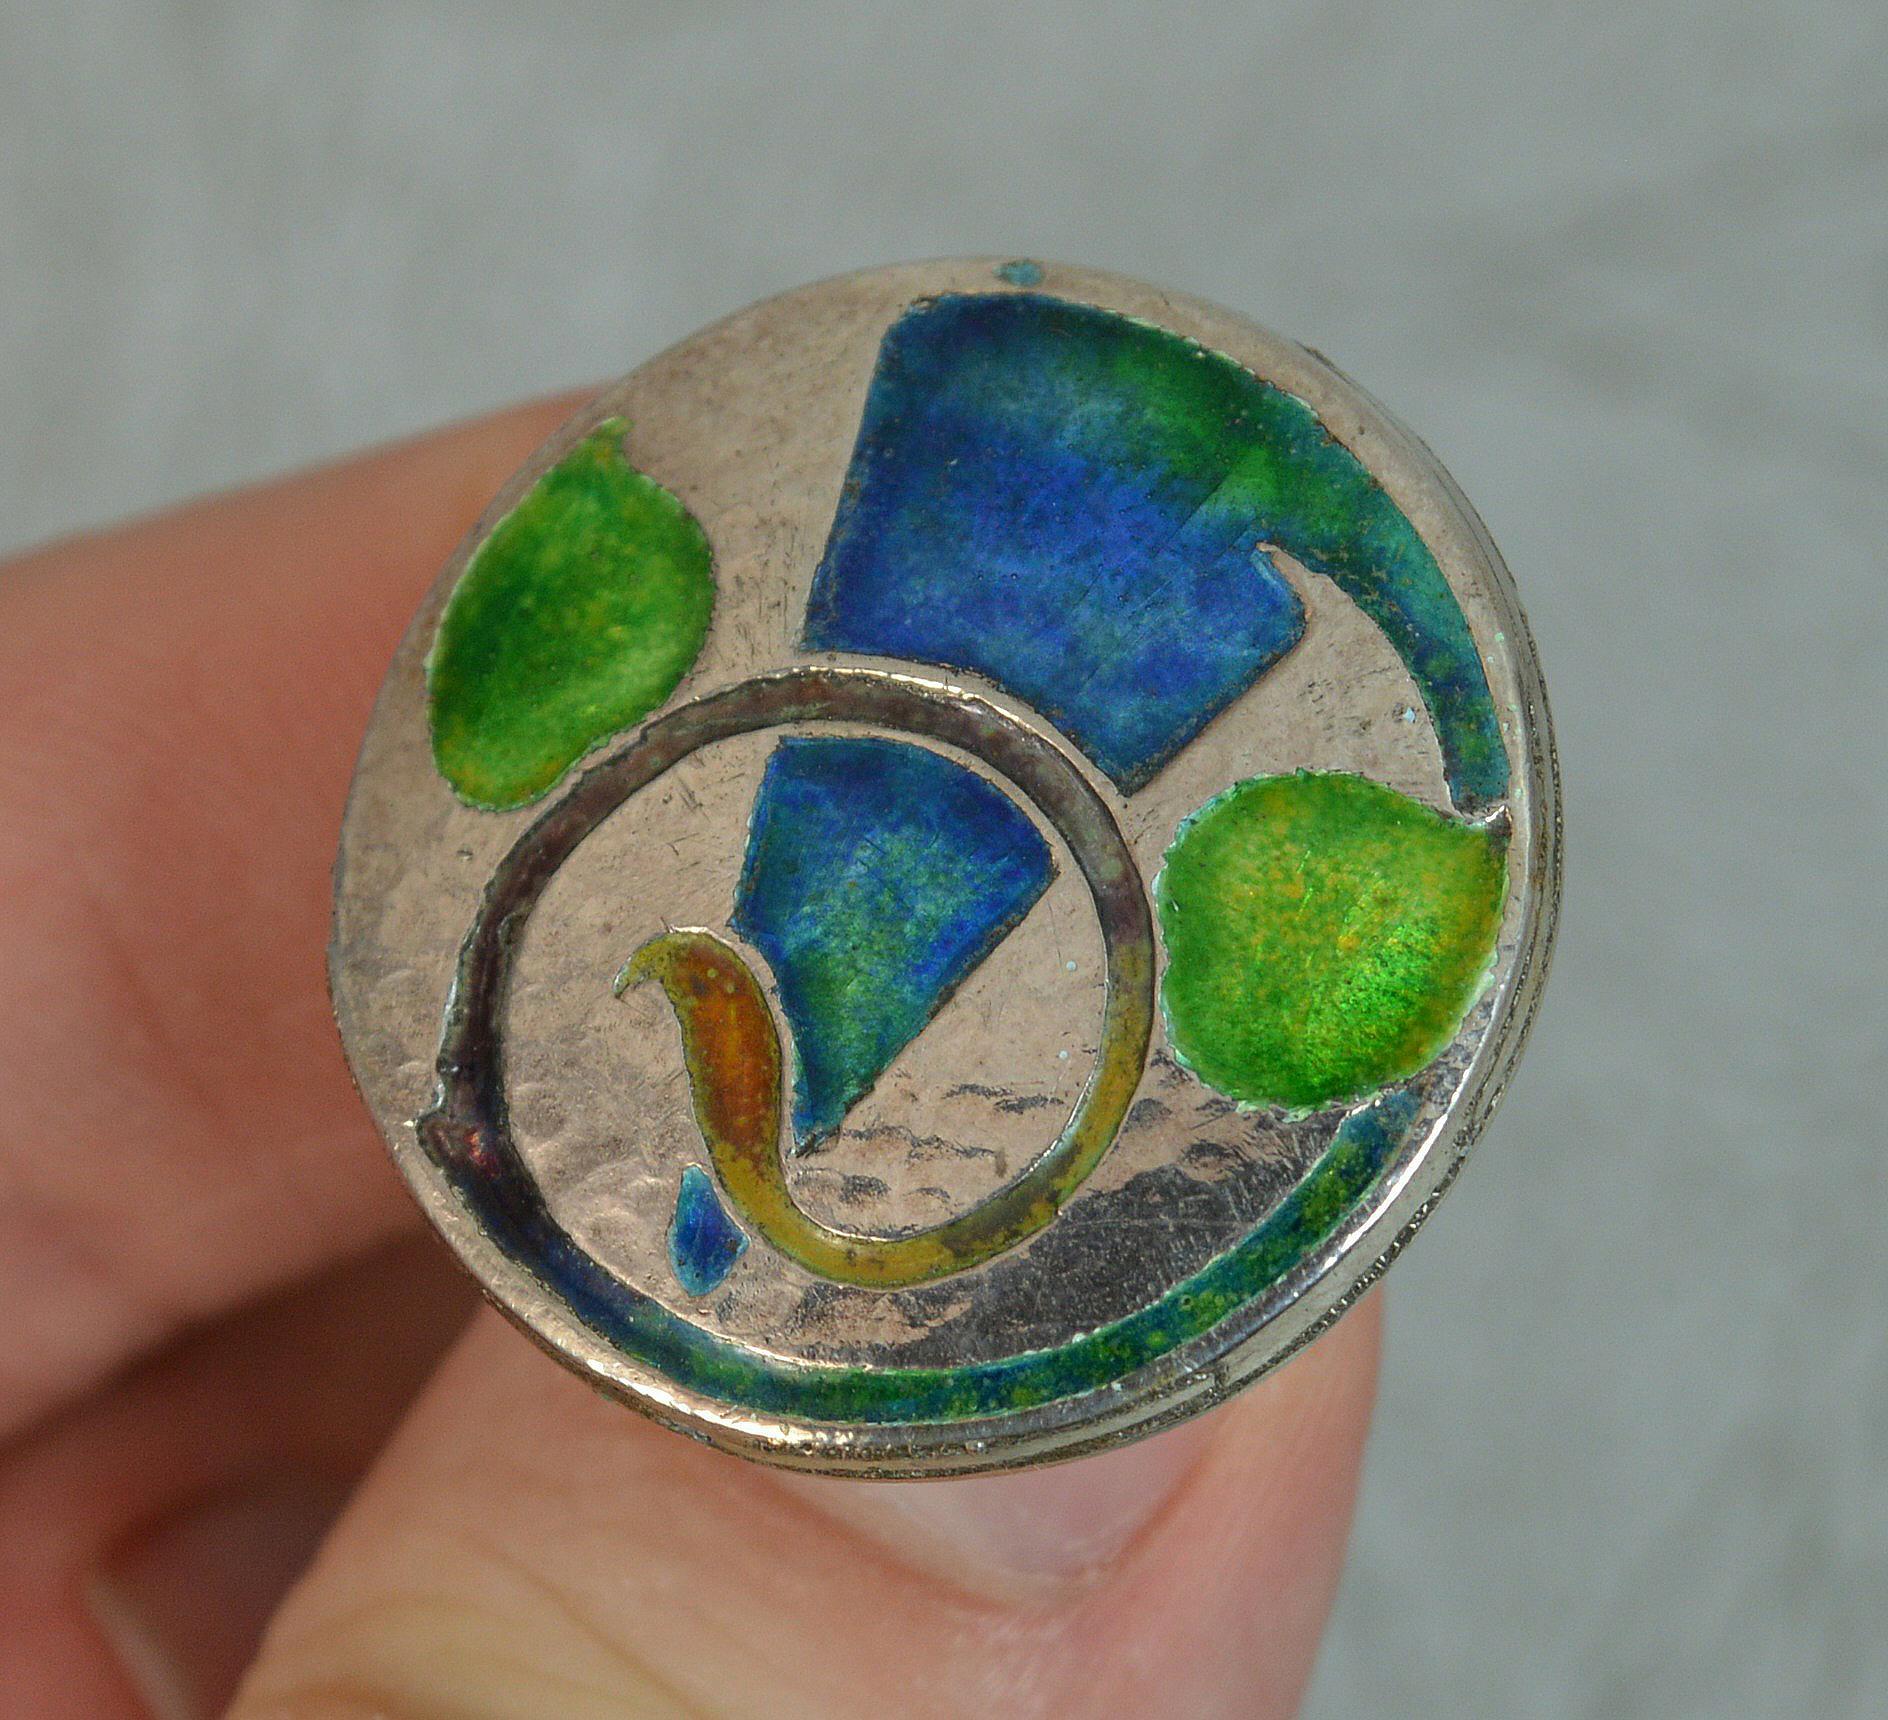 A fine circular shaped silver brooch.
Made by Liberty and Co.
Cymric example.
Stylish shape with multi coloured enamel.

Hallmarks ; marks to reverse
Weight ; 5.1 grams
Size ; 28mm x 26mm approx
Condition ; Very good. Clean example. Crisp design.